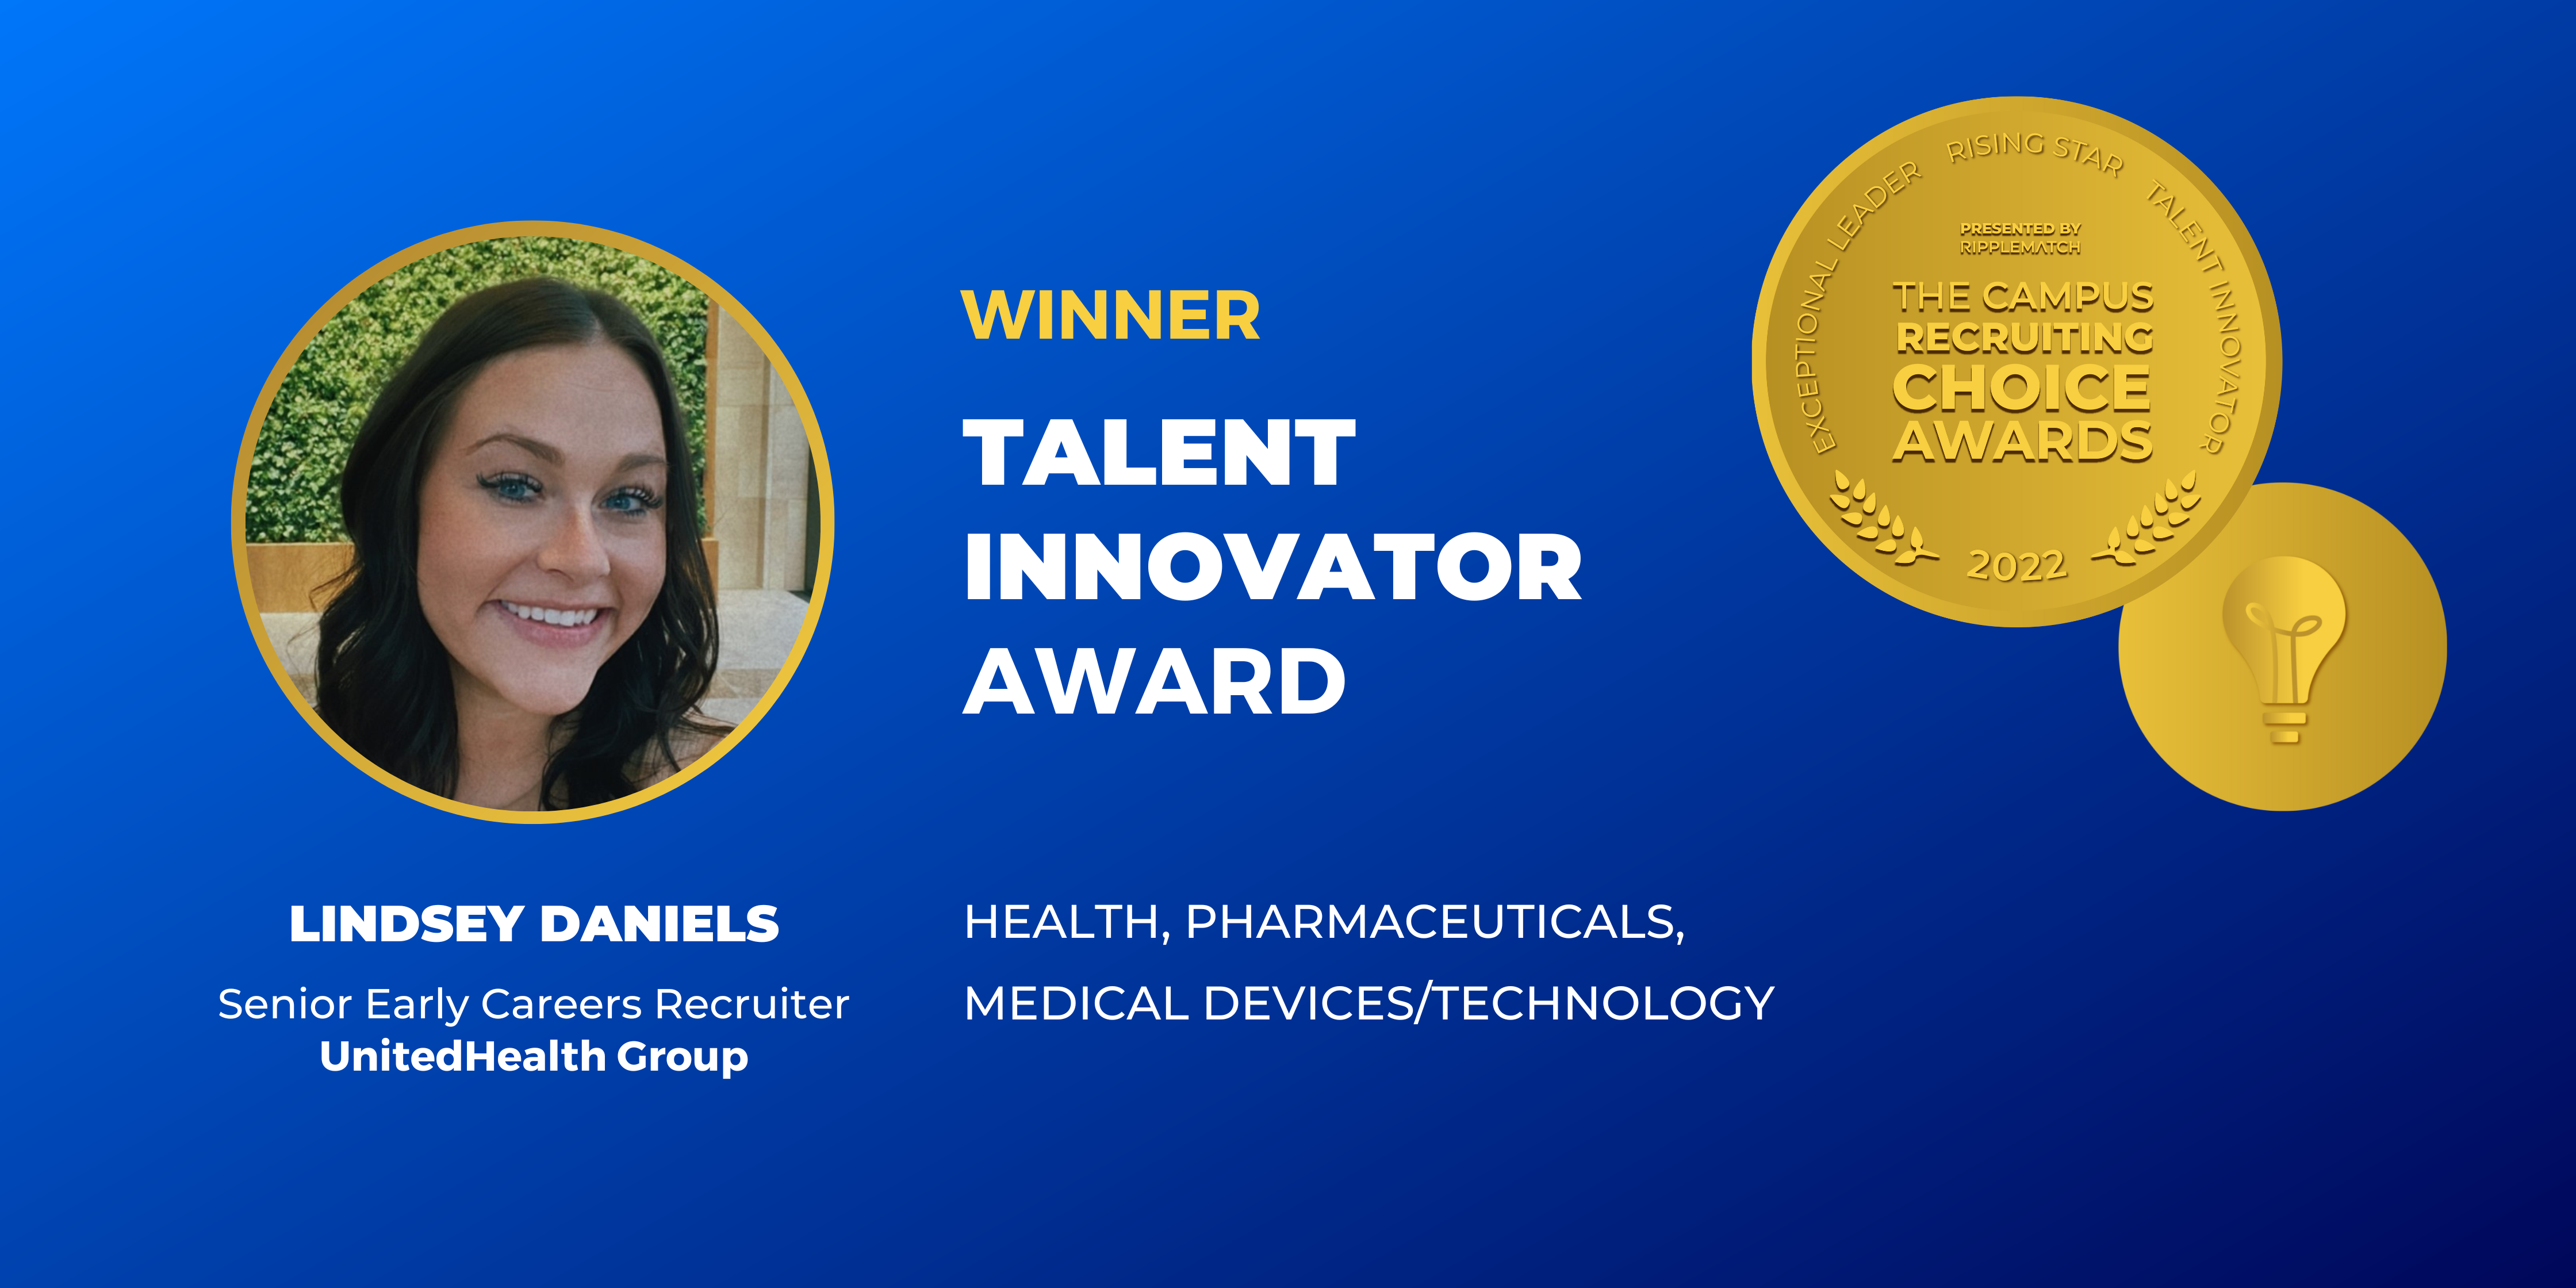 TALENT INNOVATOR - Winner - Health, Pharmaceuticals, Medical Devices Technology - Lindsey Daniels